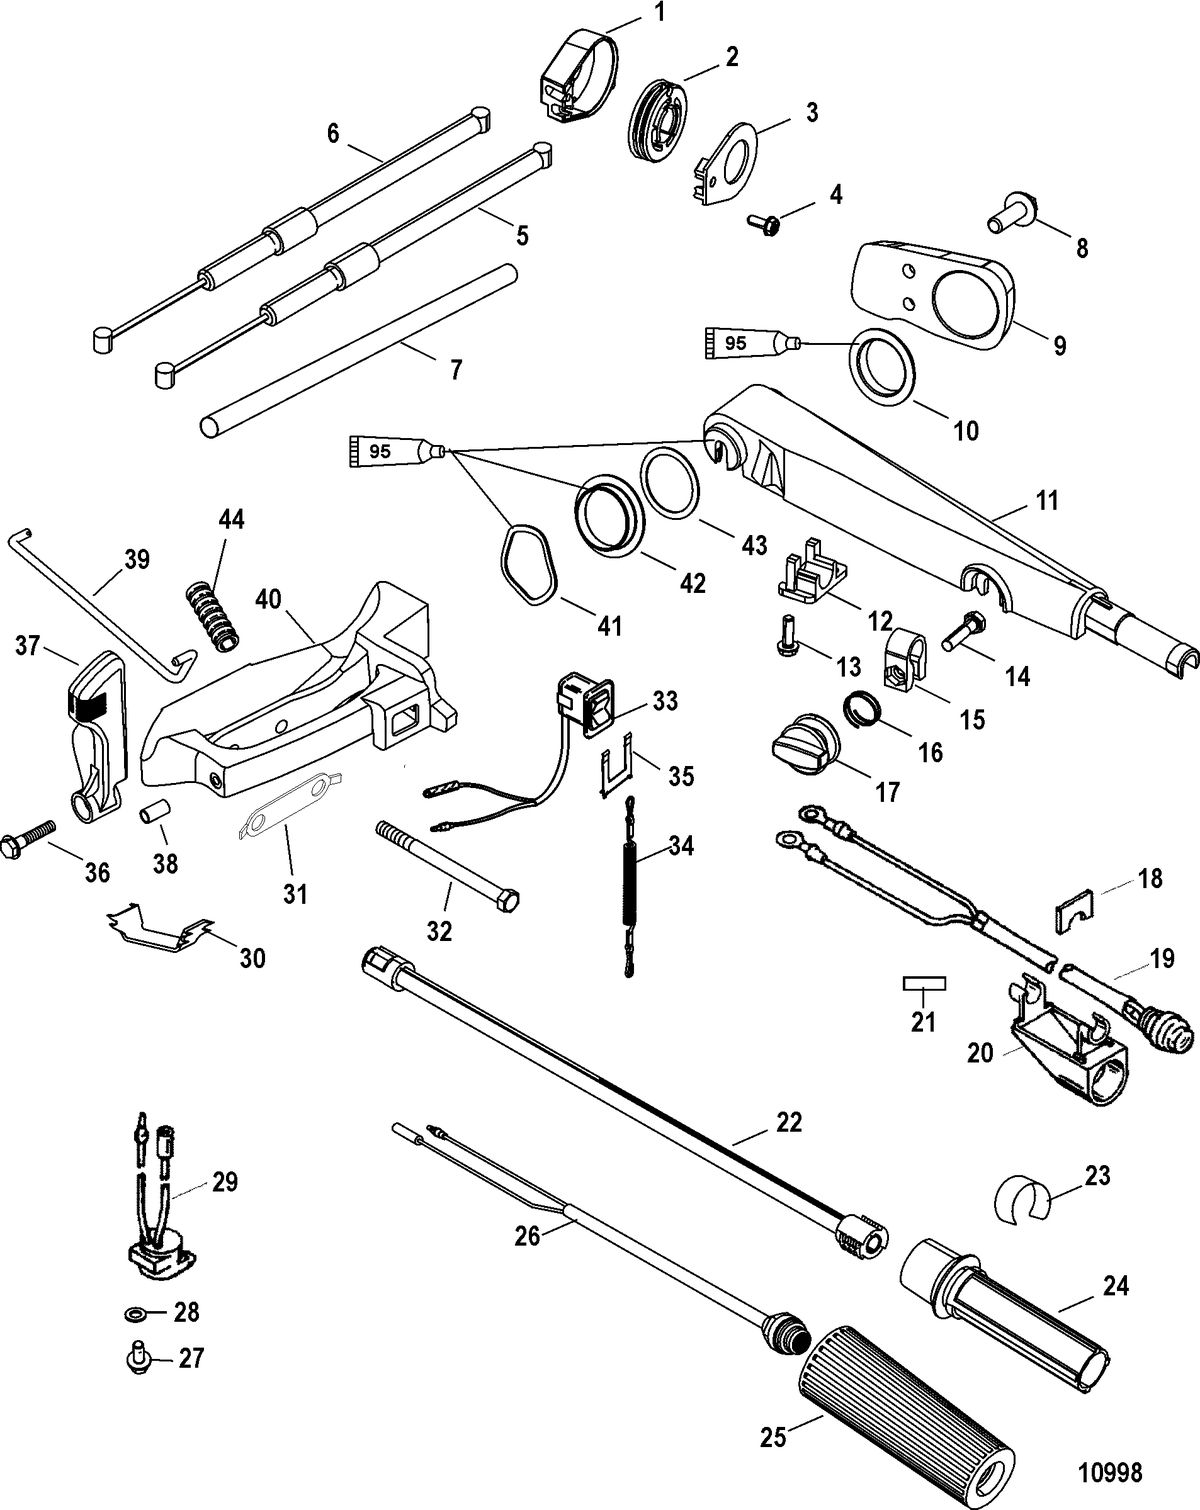 ACCESSORIES STEERING SYSTEMS AND COMPONENTS Tiller Handle Kit(828813A2 / A3 / A33)